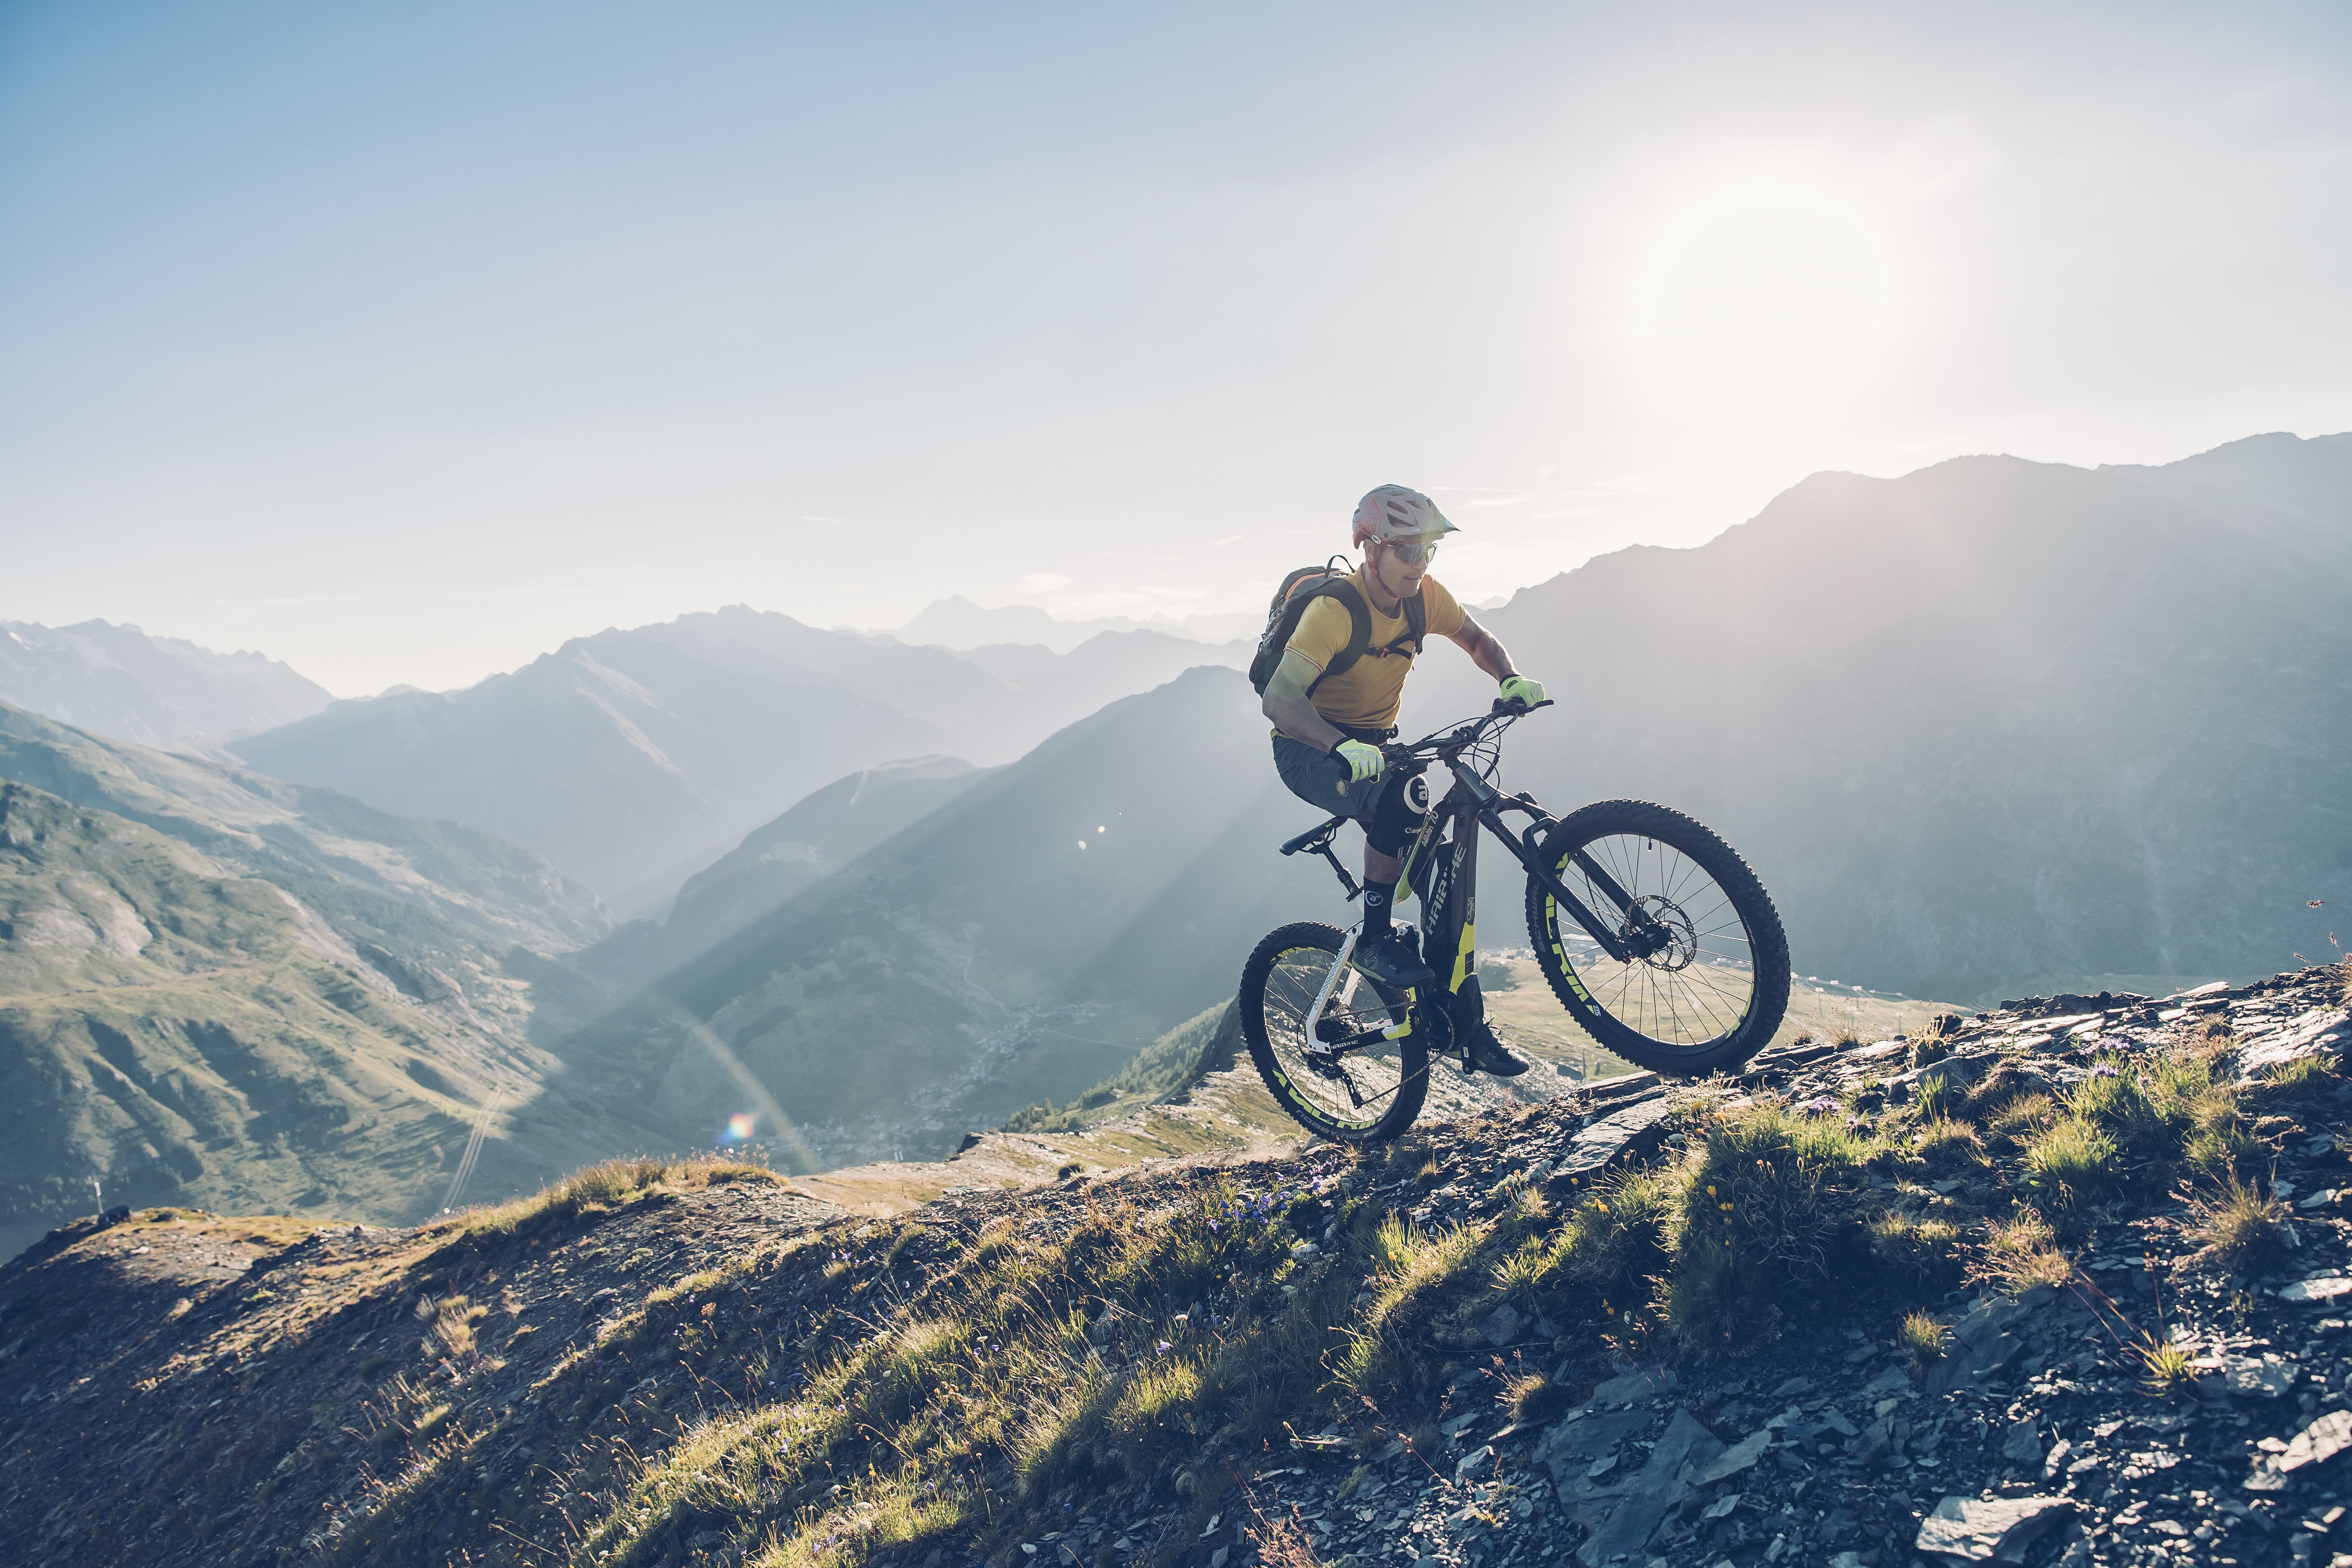 The combination of ease and fun is making the popularity of e-bikes soar. Mountain biking purists may call it cheating, but you’ll reach places you wouldn’t otherwise get to